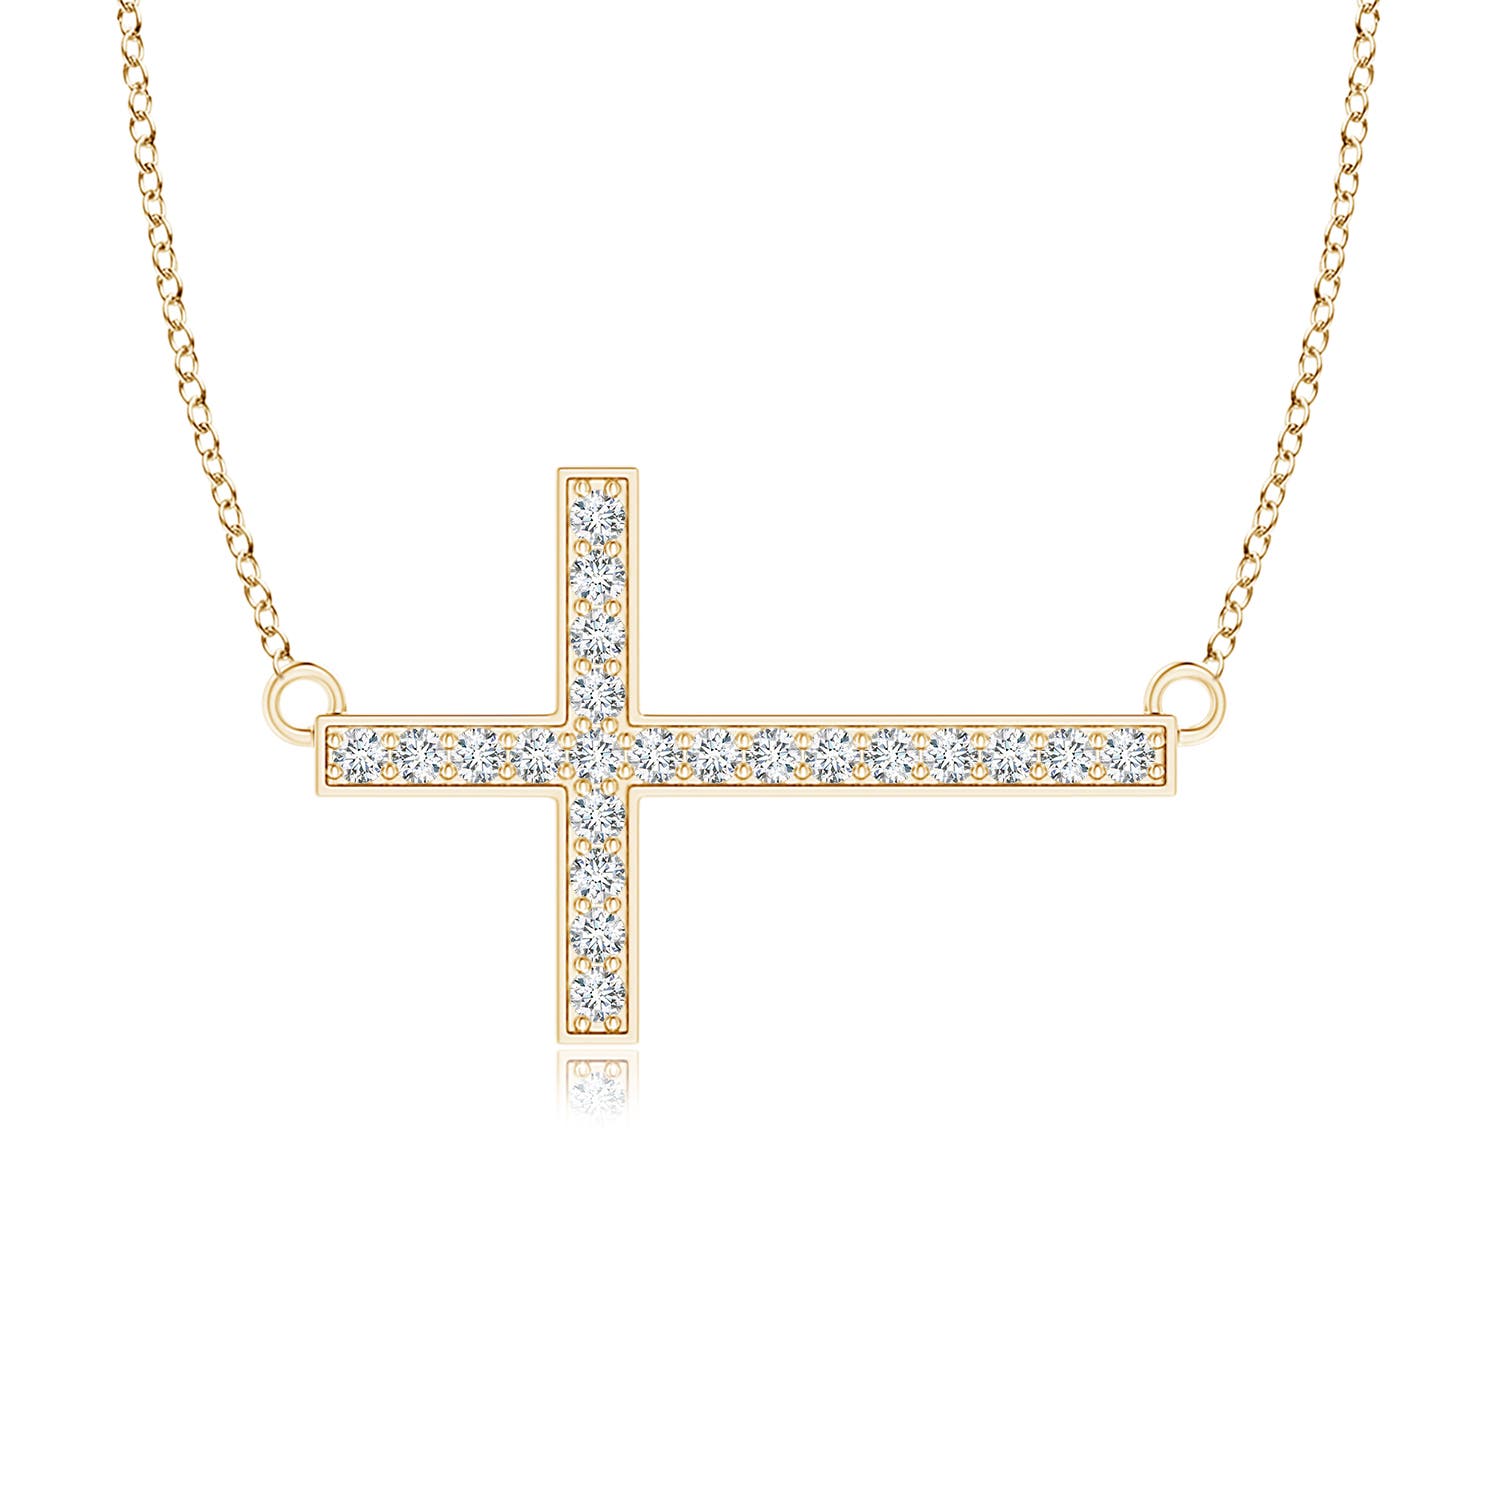 18kt yellow gold Tradition cross pendant necklace